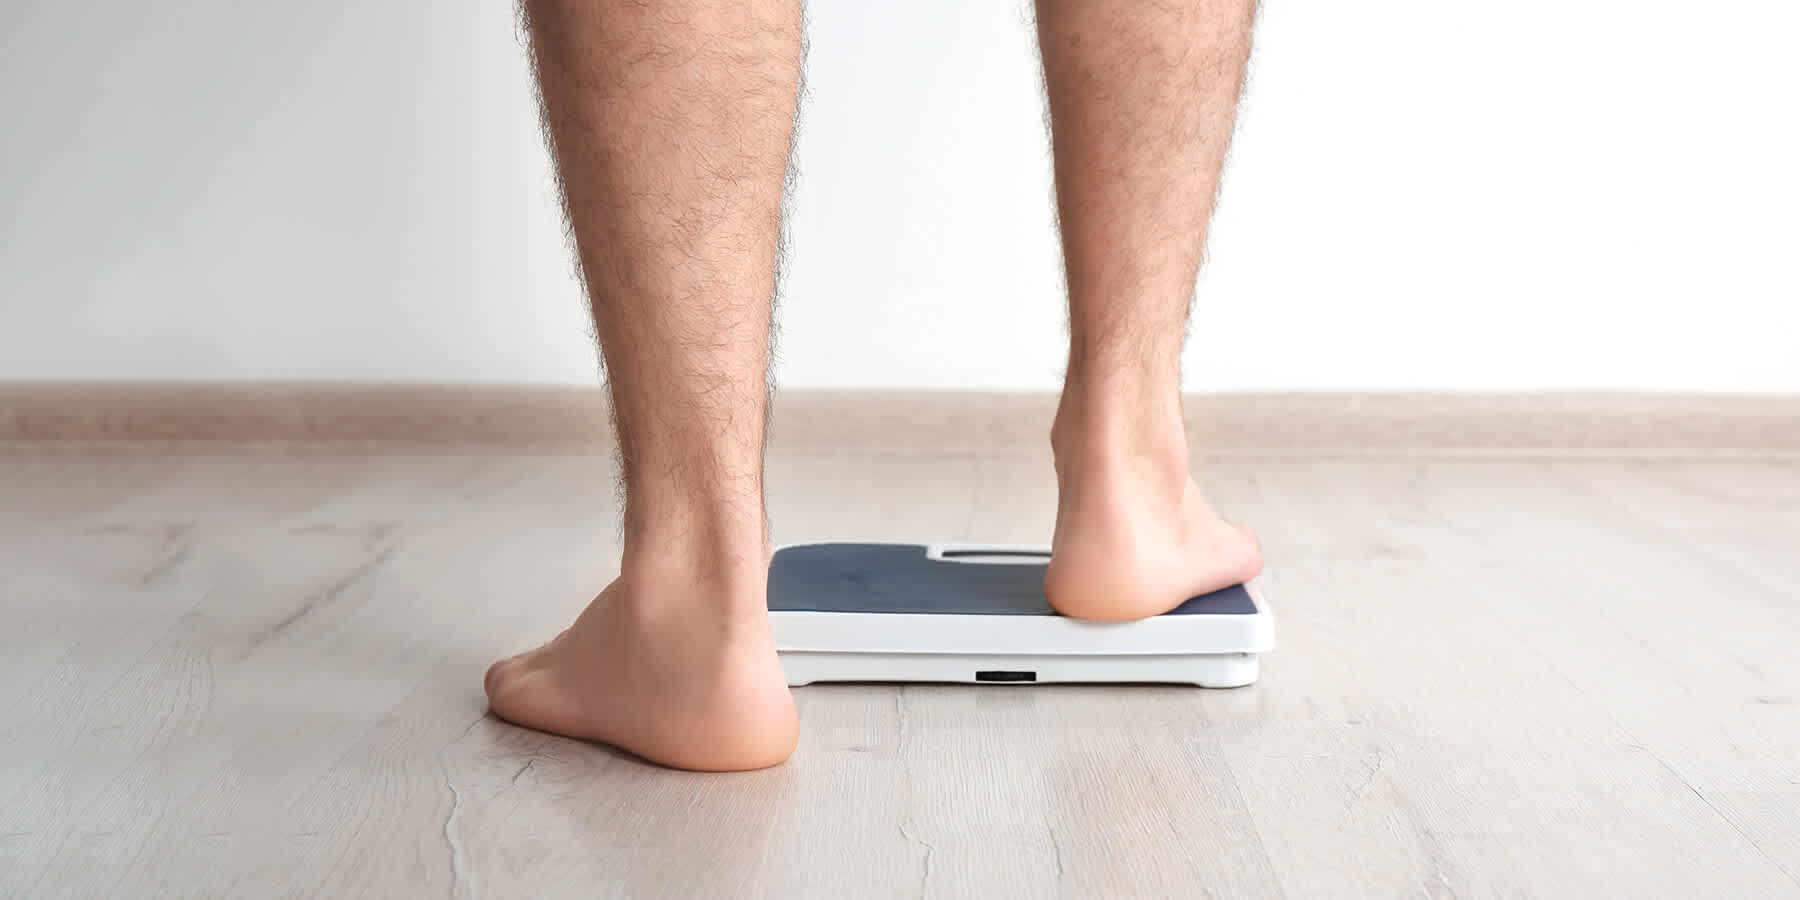 Man stepping on scale after noticing symptoms of unhealthy testosterone levels